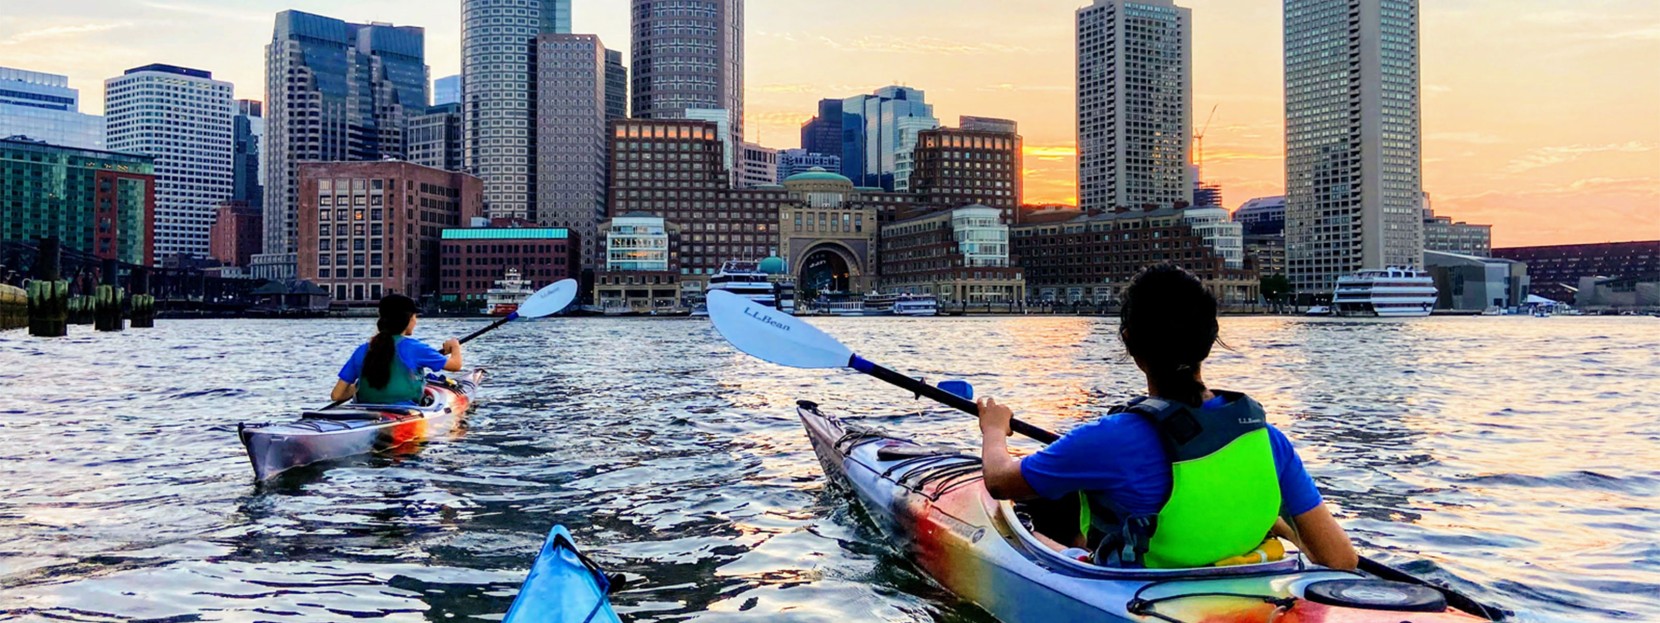 Two kayakers headed into Boston Harbor at sunset.